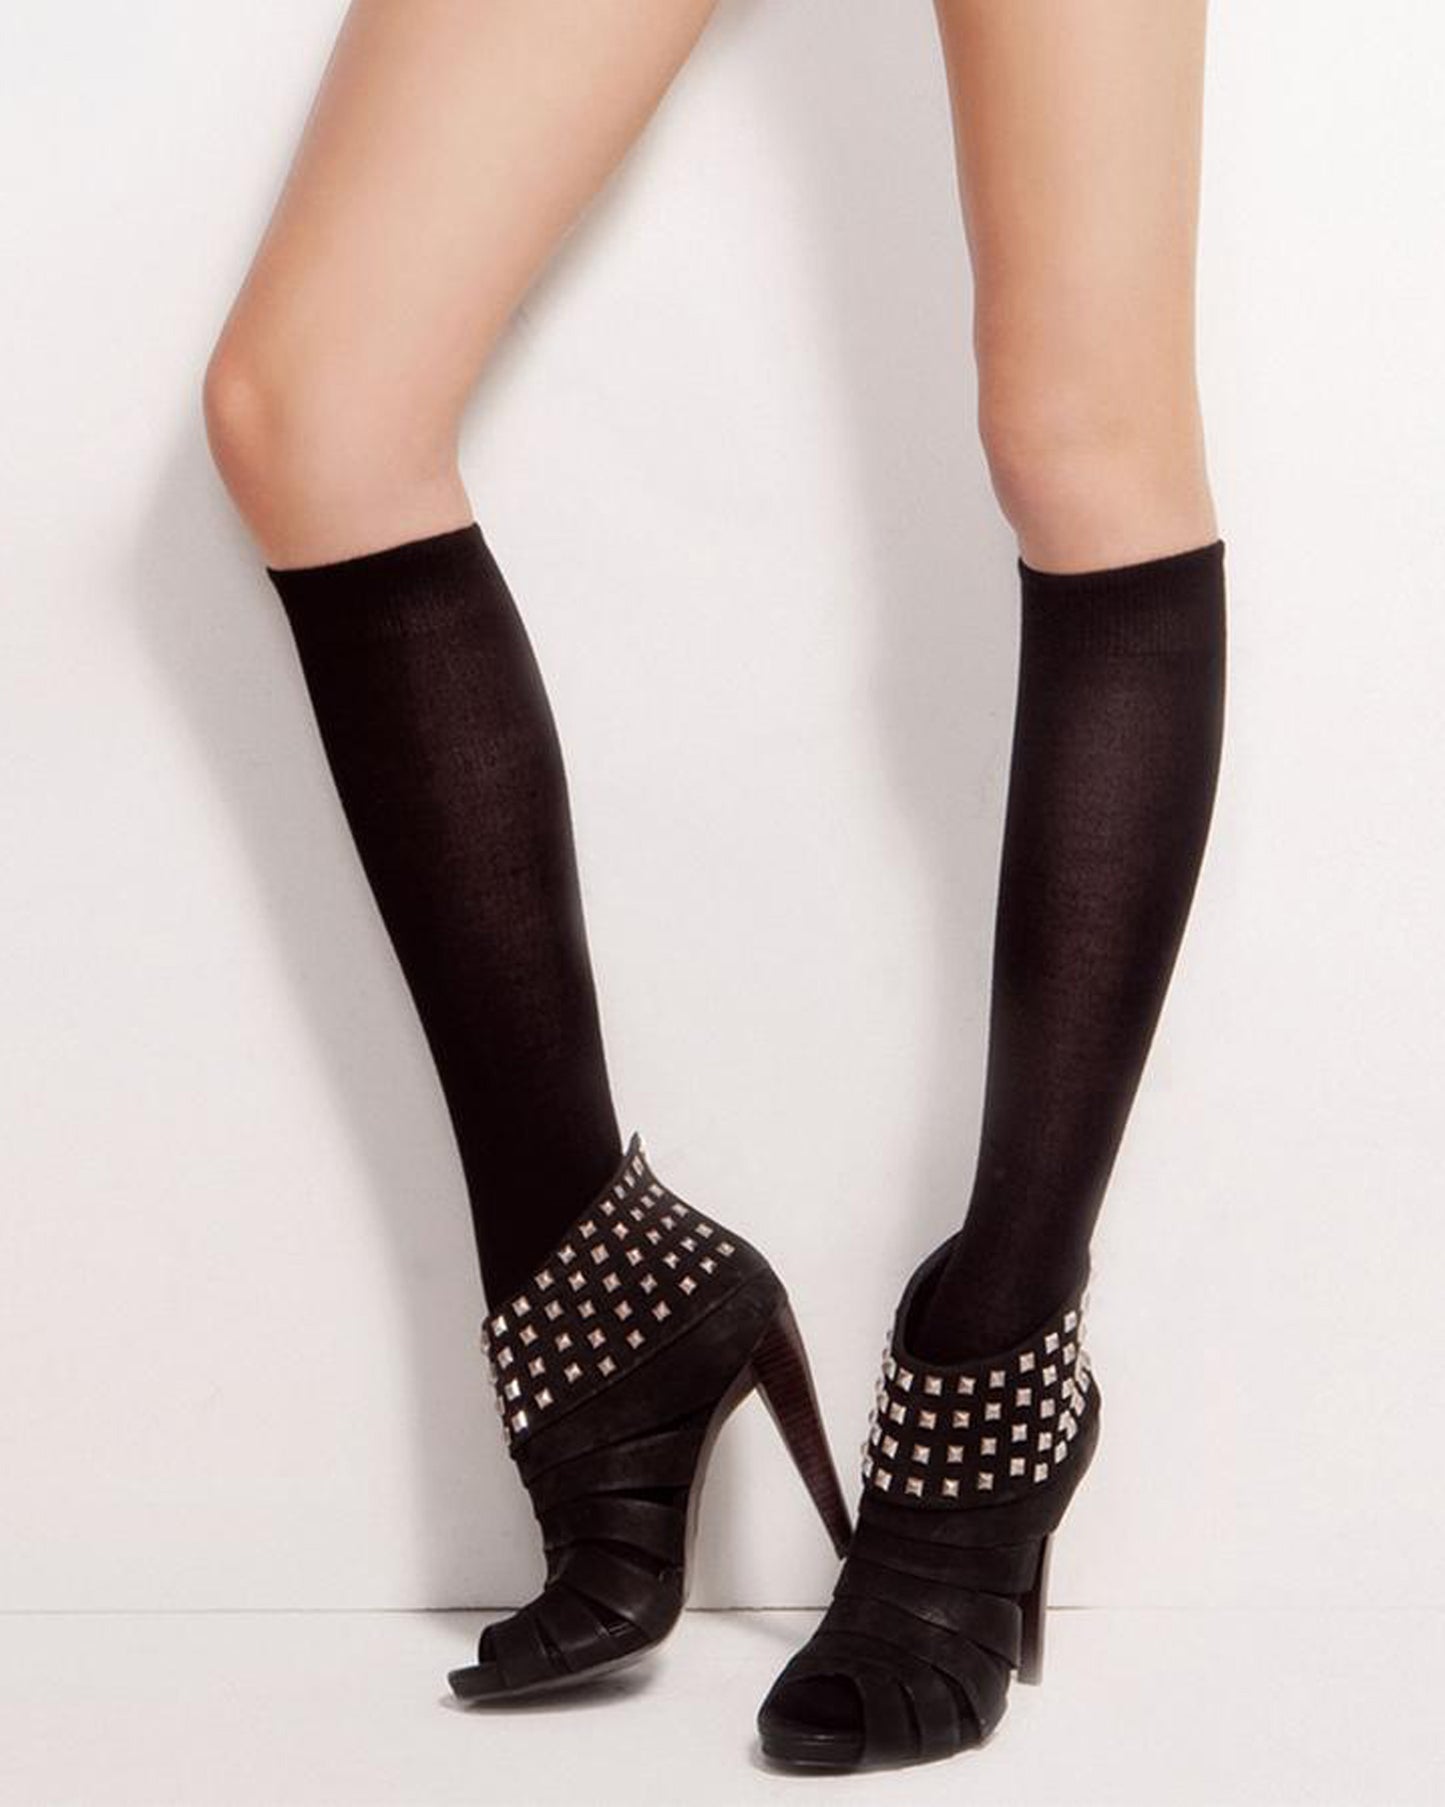 SiSi Soft Cotton Gambaletto -  Black light weight cotton knee length socks with a deep elasticated cuff, shaped heel and flat toe seam.